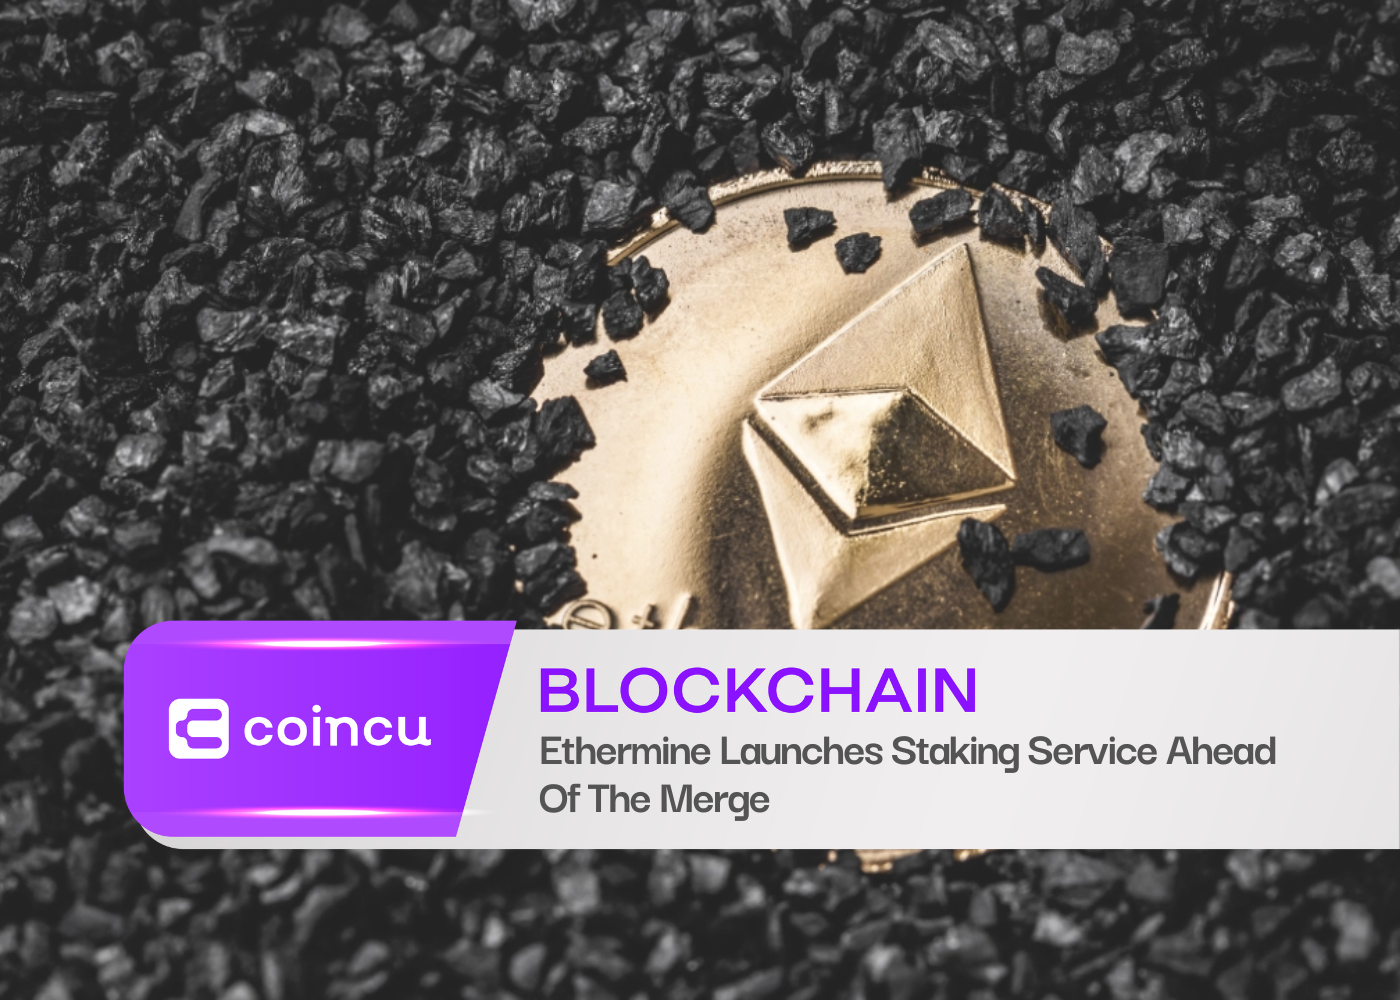 Ethermine Launches Staking Service Ahead Of The Merge